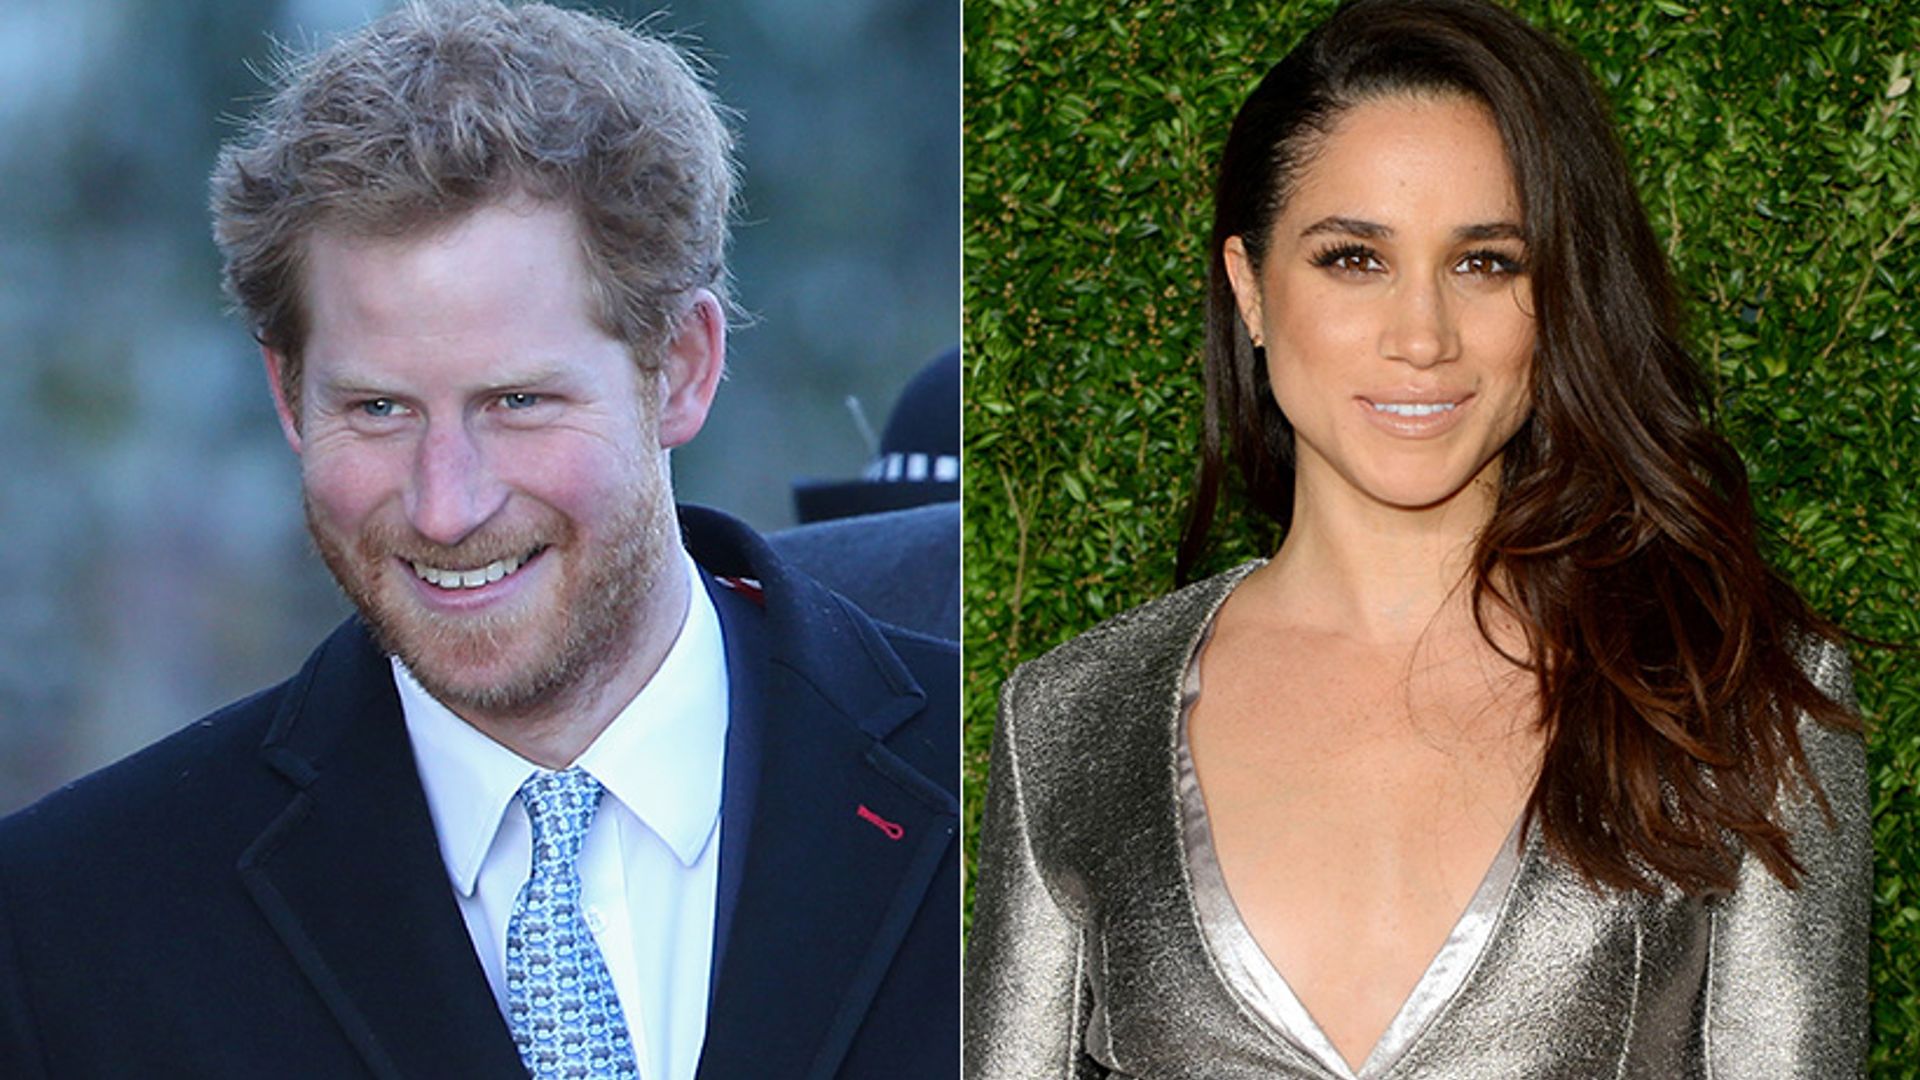 Prince Harry and Meghan Markle to make first official appearance together at Invictus Games, say reports